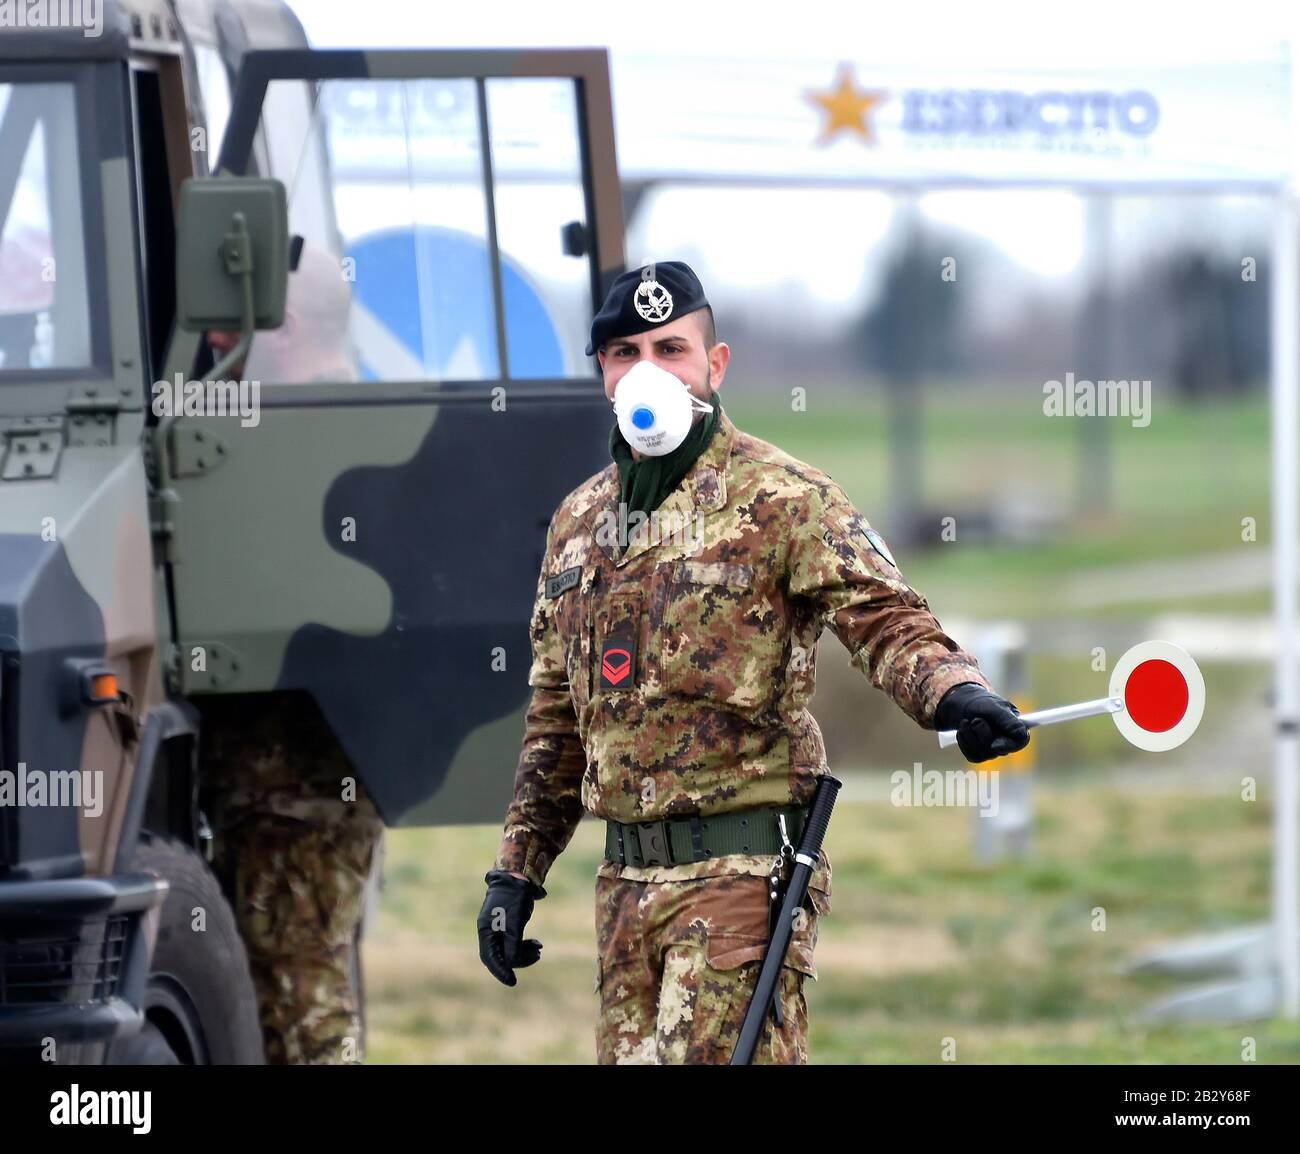 Turano Lodigiano. 4th Mar, 2020. An Italian Army soldier checks transit to and from the cordoned areas in Turano Lodigiano, Italy, Feb. 27, 2020. Italian authorities on Tuesday confirmed 2,263 coronavirus cases, which marked an increase of 428 infections compared to the previous day. The figure did not include recoveries or fatalities, whose numbers were provided separately. Credit: Xinhua/Alamy Live News Stock Photo